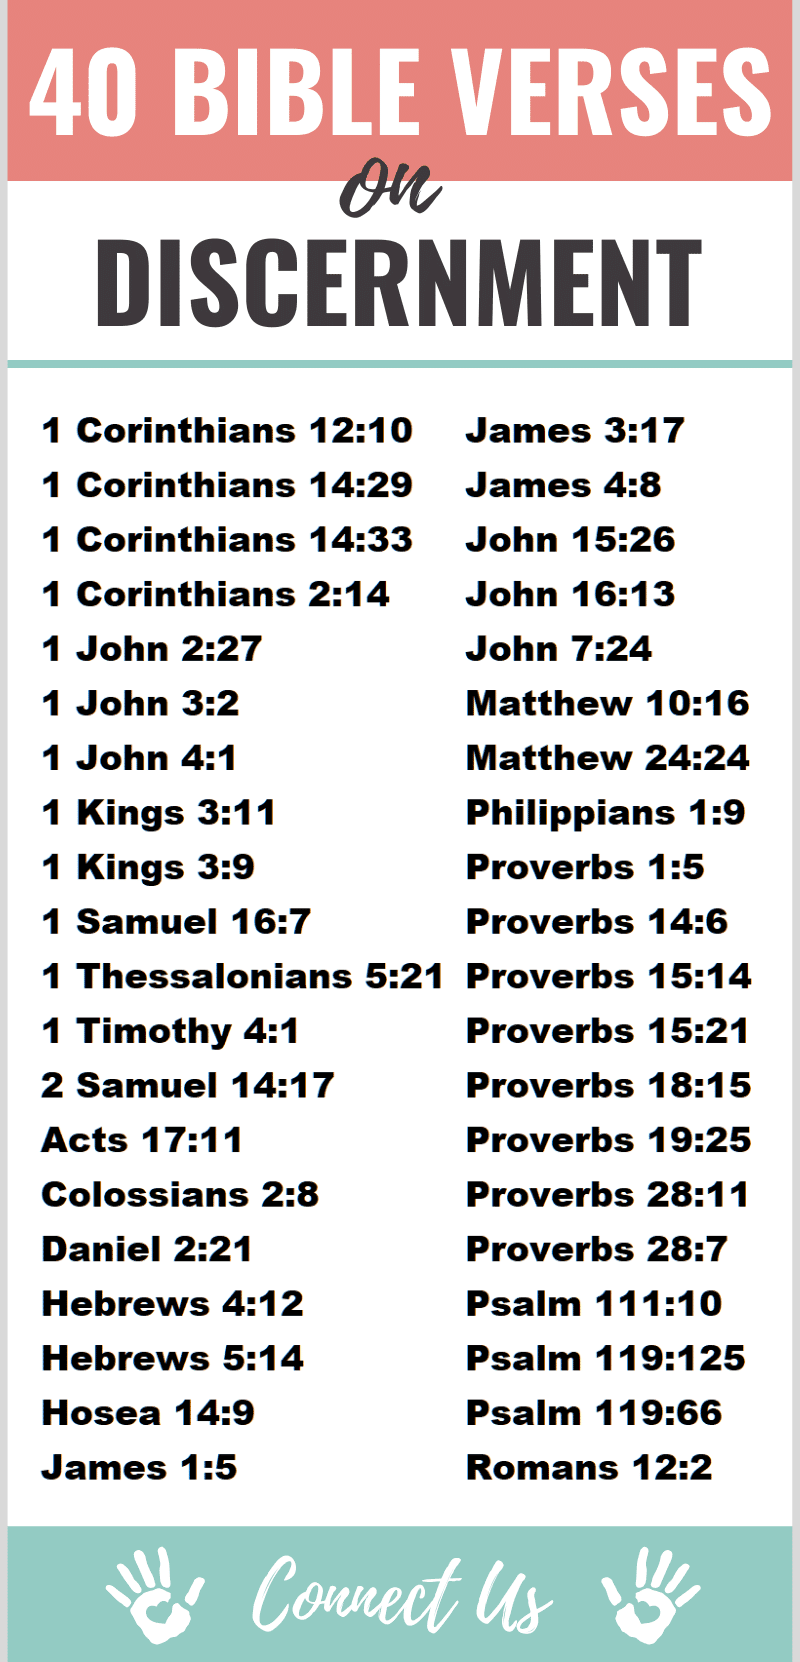 Bible Verses on Discernment